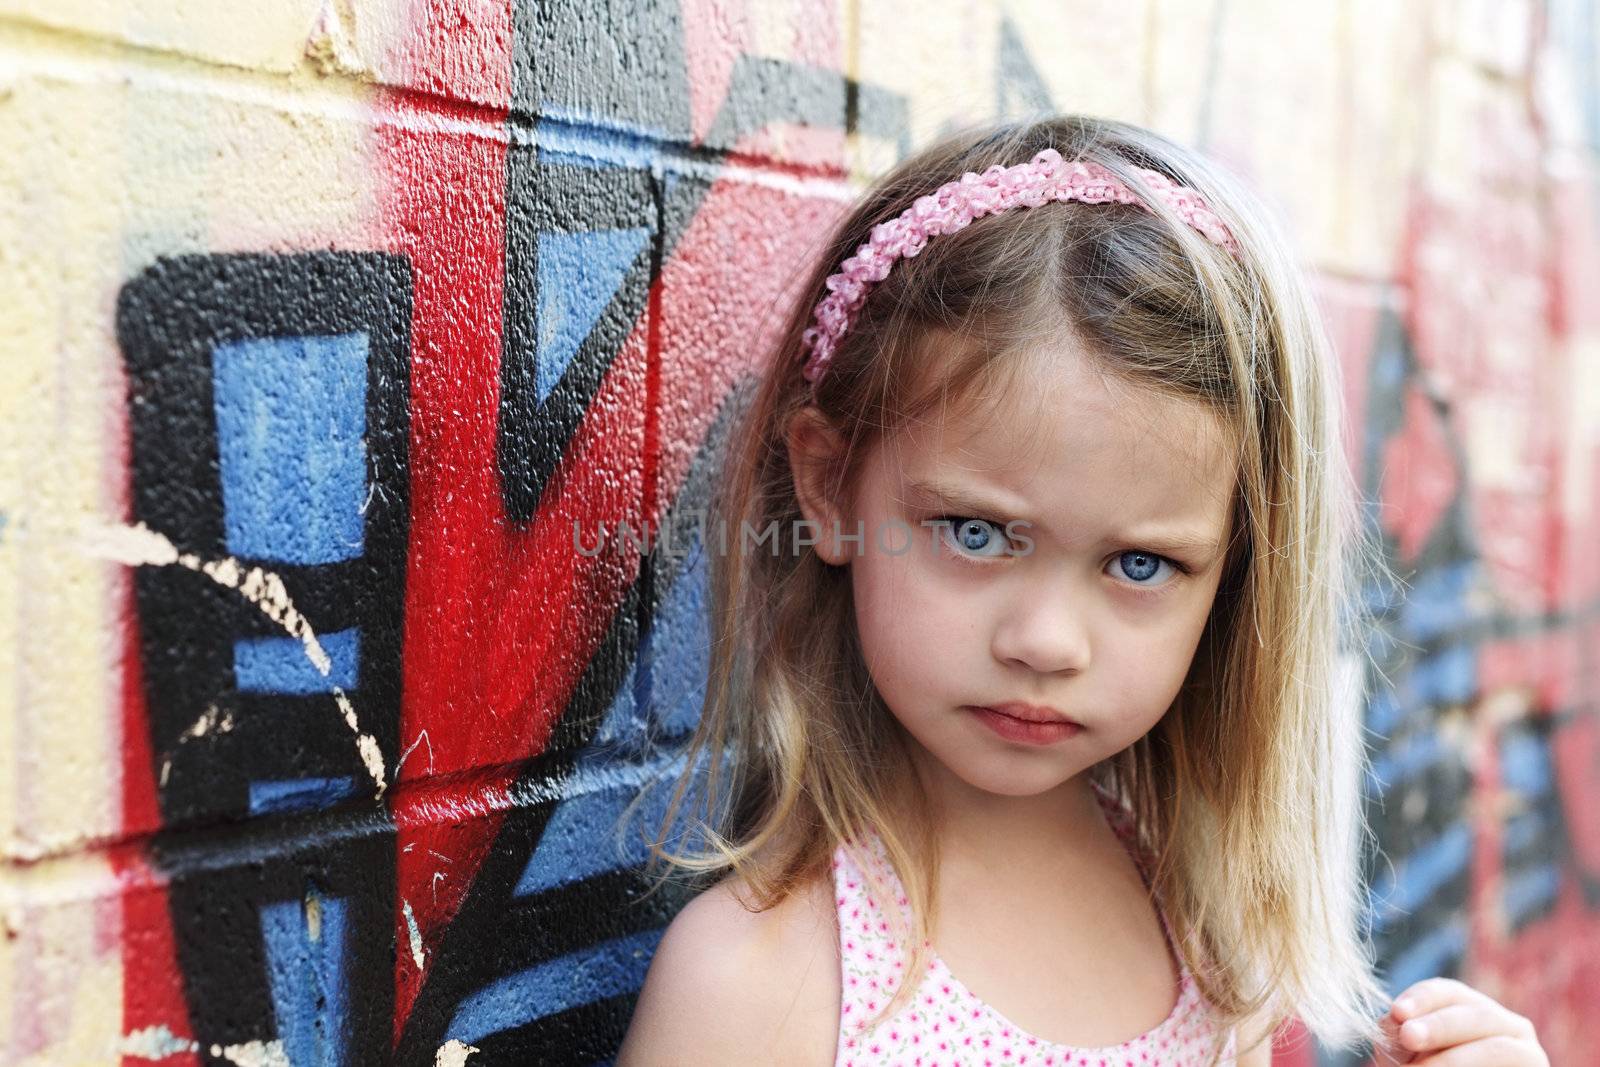 Worried little girl in an urban setting looking into the camera.
